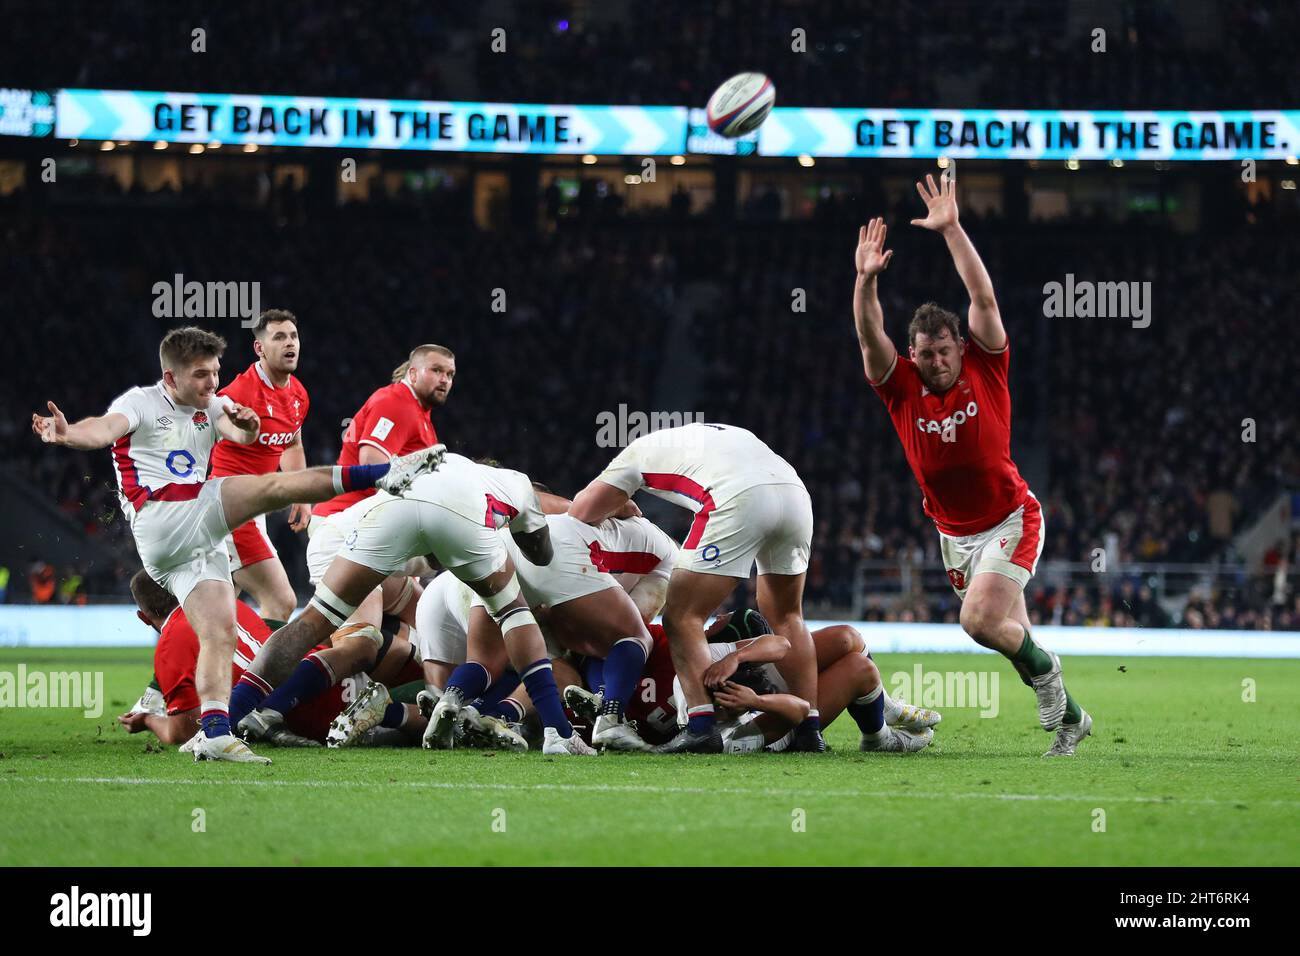 London, UK. 26th Feb, 2022. Harry Randell of England (l) in action. Guinness Six Nations championship 2022 match, England v Wales at Twickenham Stadium in London on Saturday 26th February 2022. pic by Andrew Orchard/Andrew Orchard sports photography/ Alamy Live News Credit: Andrew Orchard sports photography/Alamy Live News Stock Photo